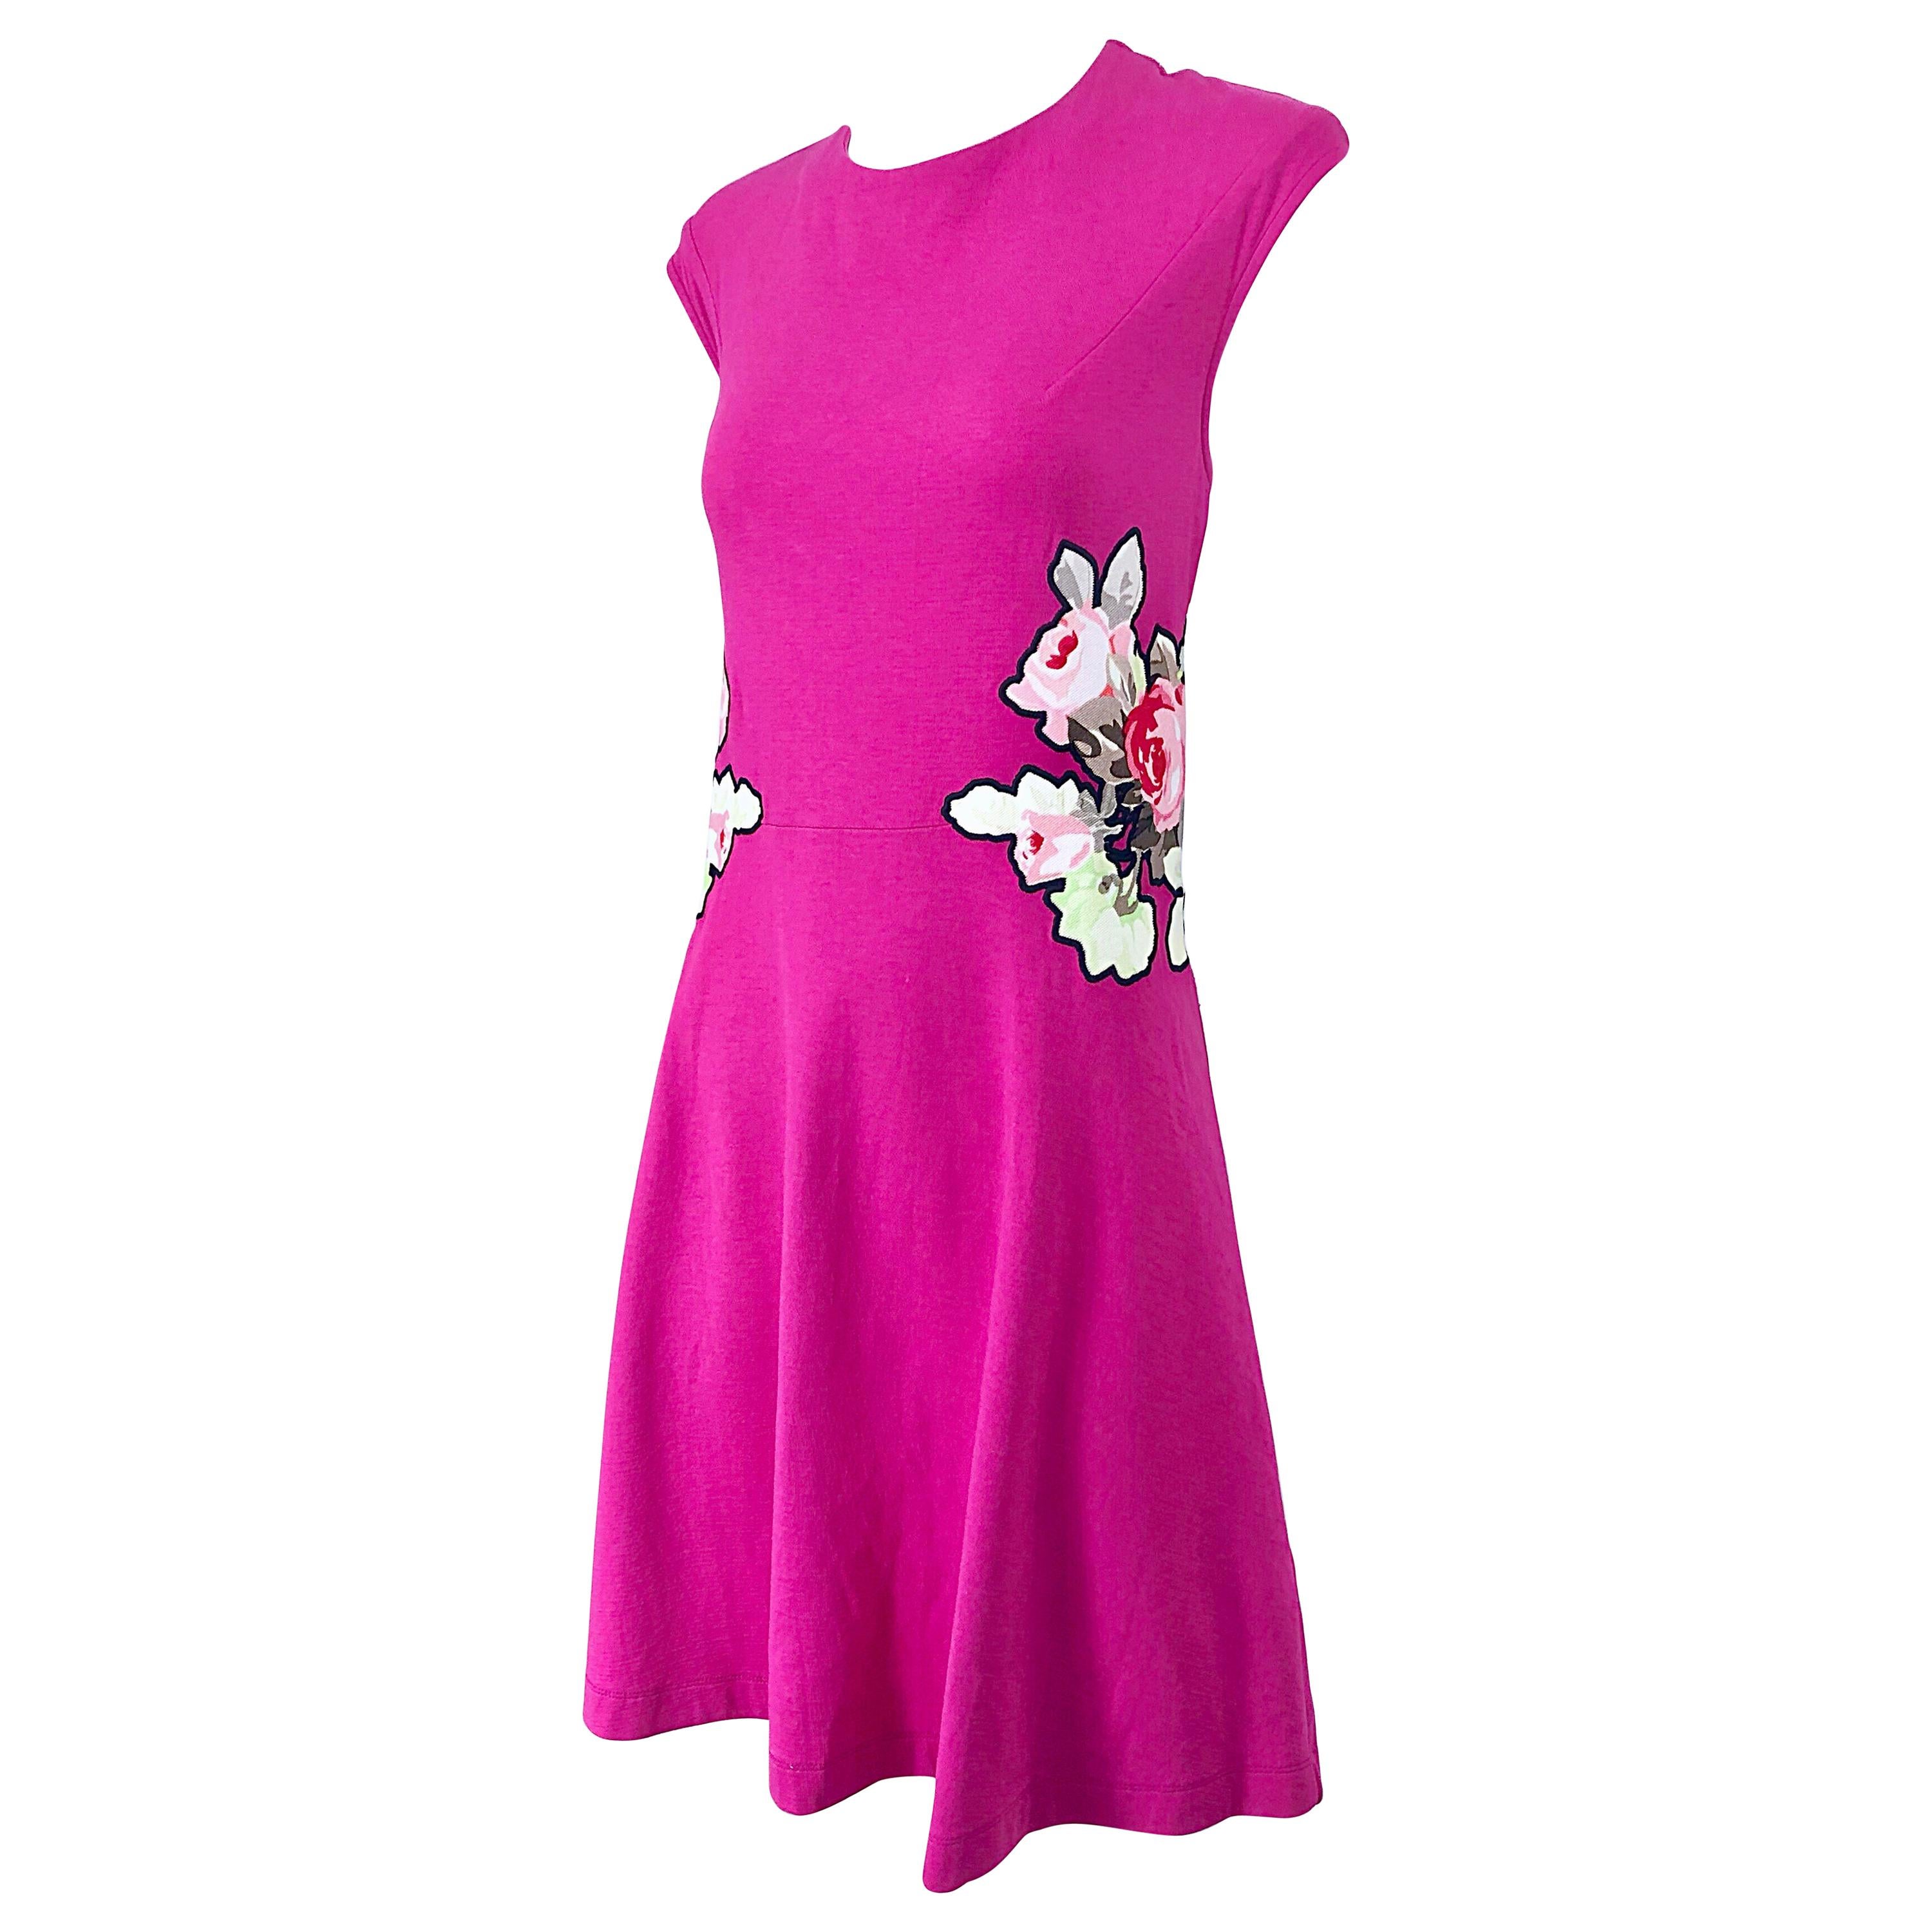 Carven Hot Pink Bouquet of Roses Sleeveless Cotton A - Line Dress Size Medium